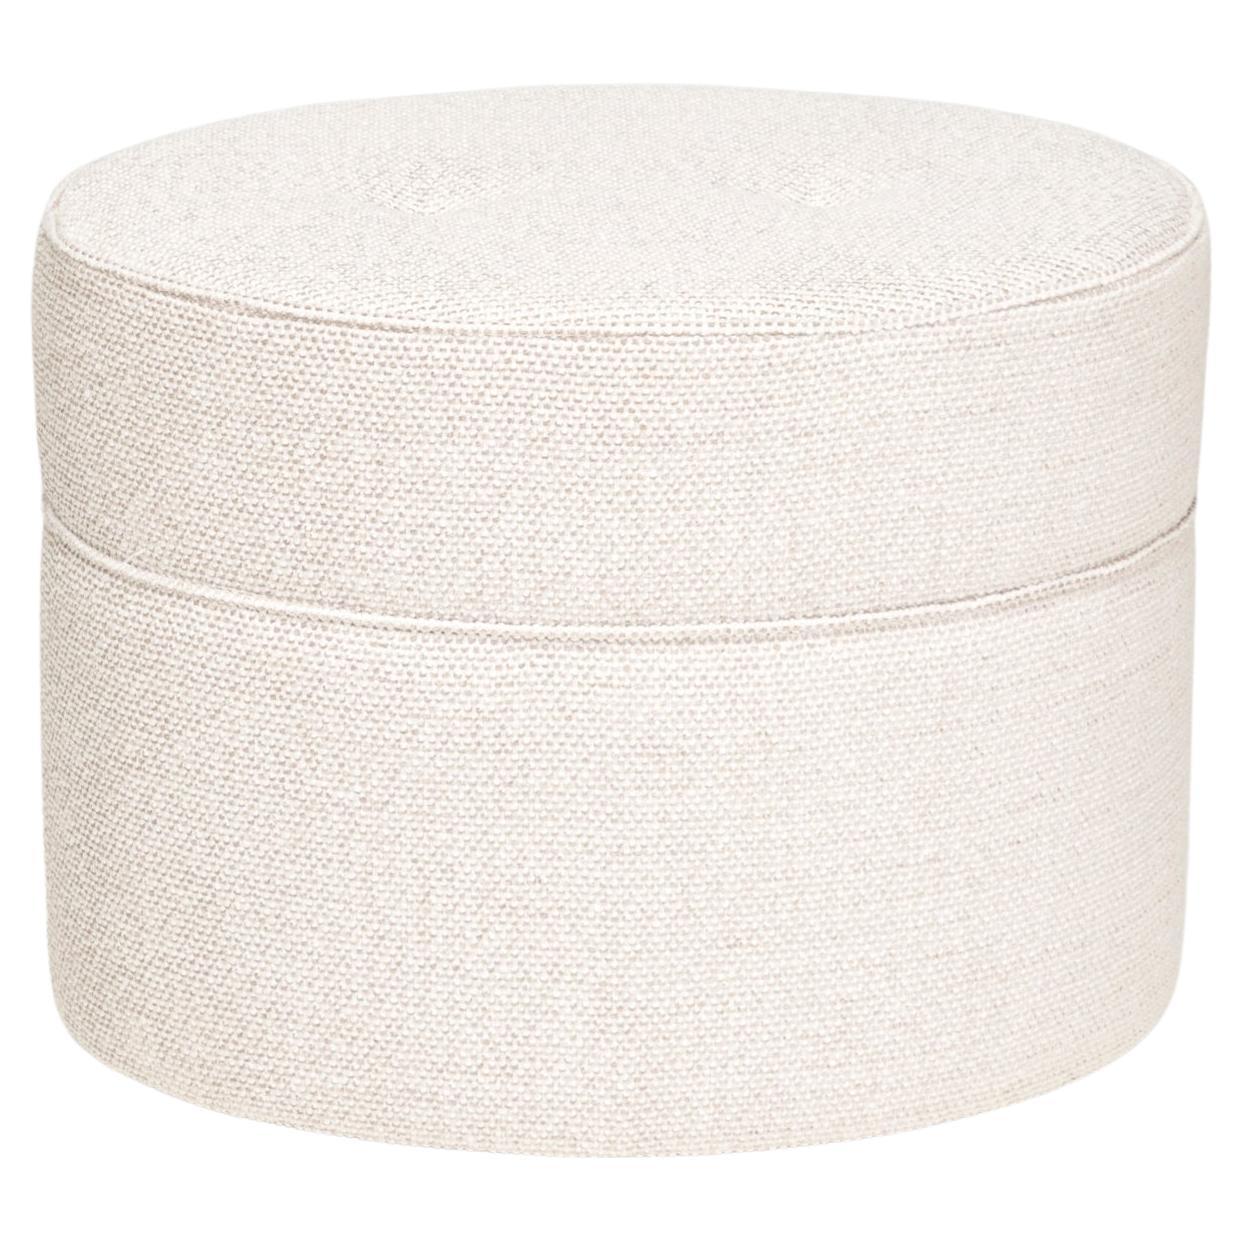 Beige Oval Vanity Fabric Stool With Wheels  For Sale